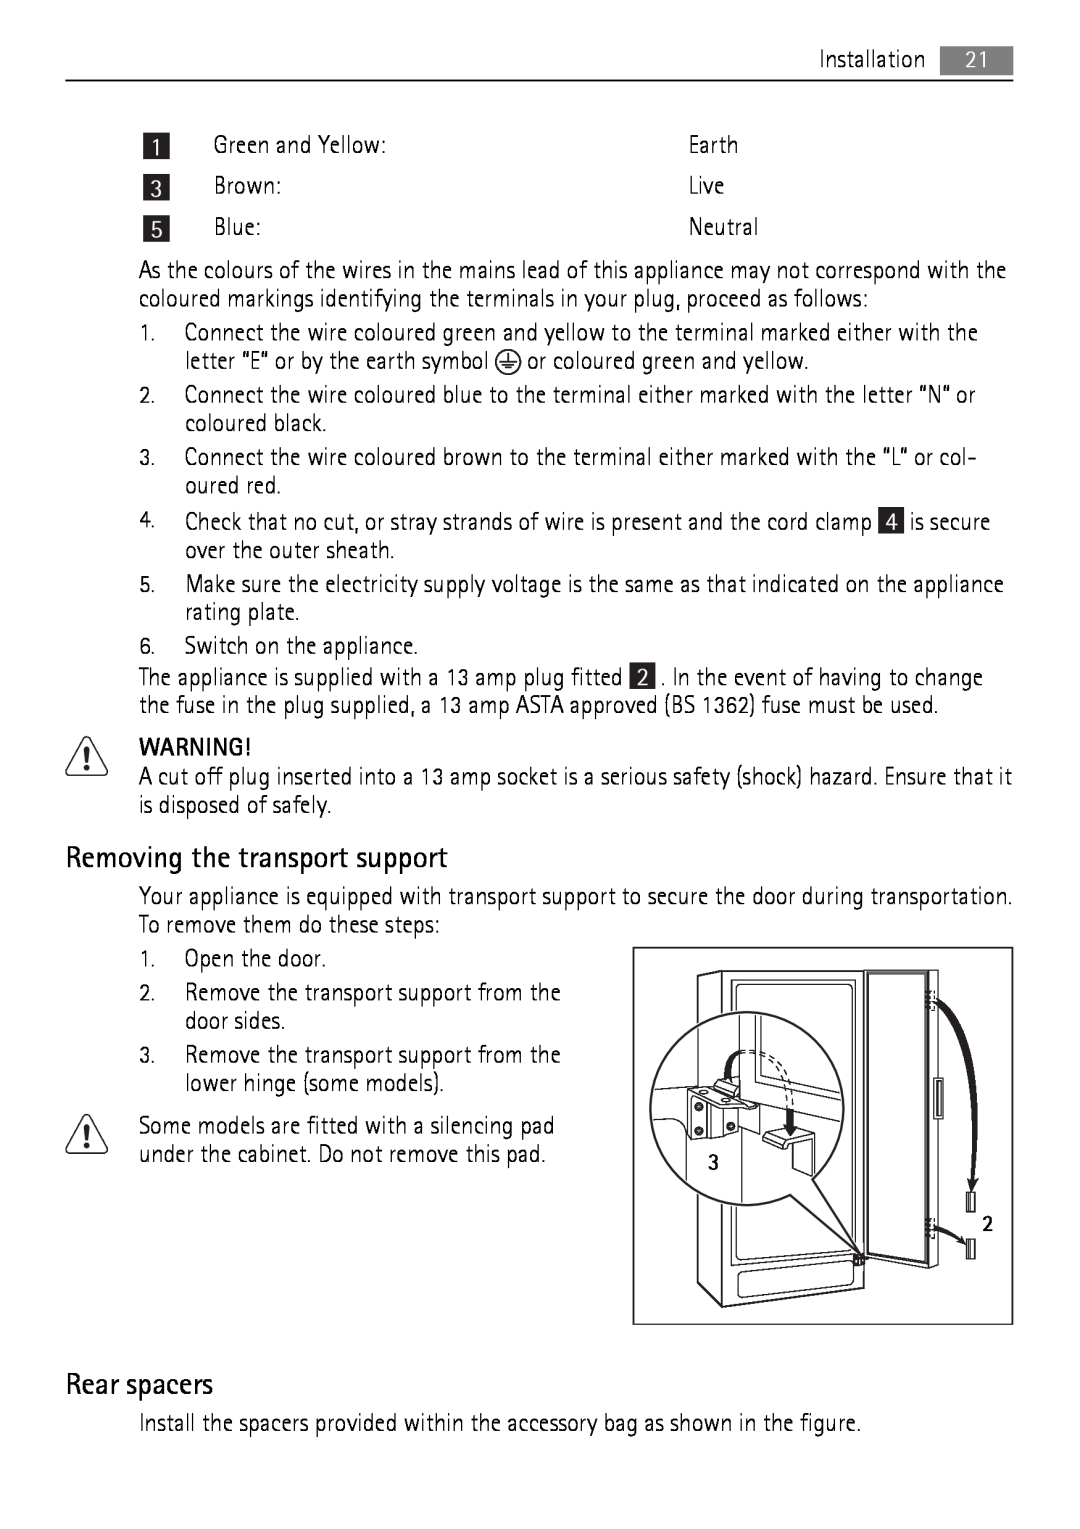 AEG A92860GNX0 user manual Removing the transport support, Rear spacers 